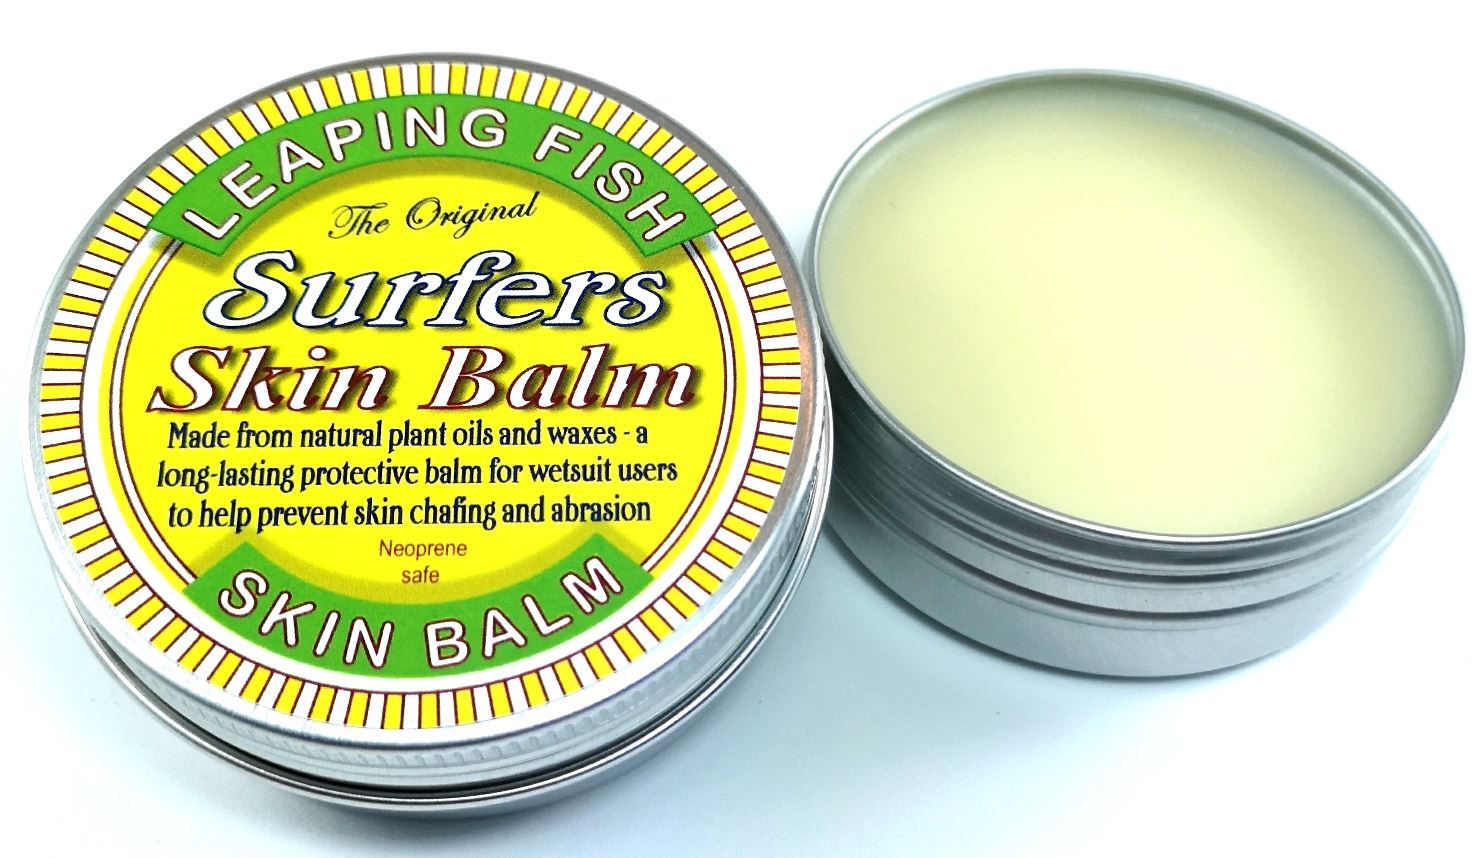 Surfers Skin Balm 60ml / 60g Tin by Leaping Fish